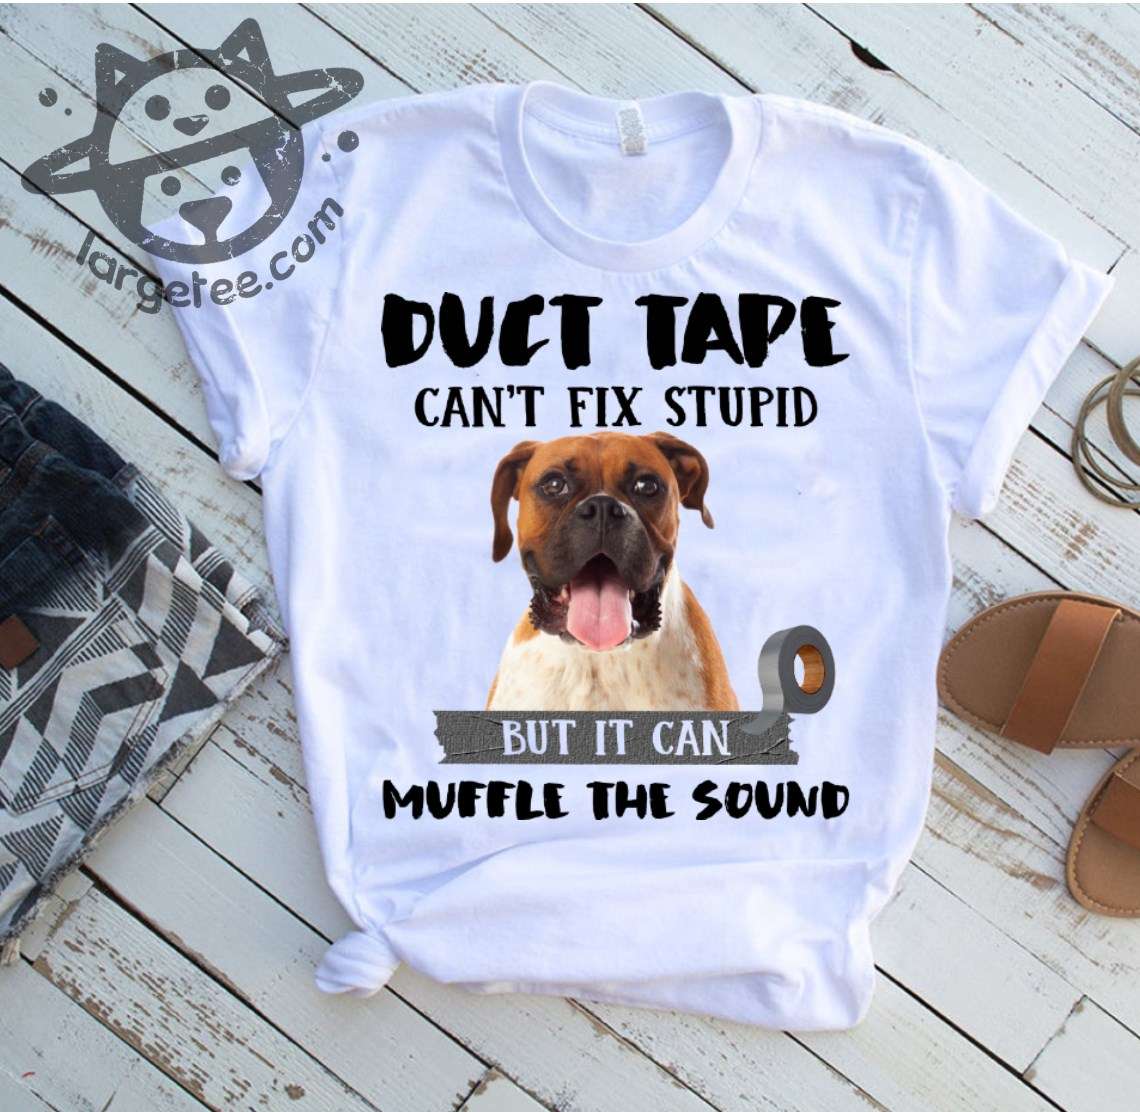 Duct tape can't fix stupid but it can muffle the sound - Boxer breed